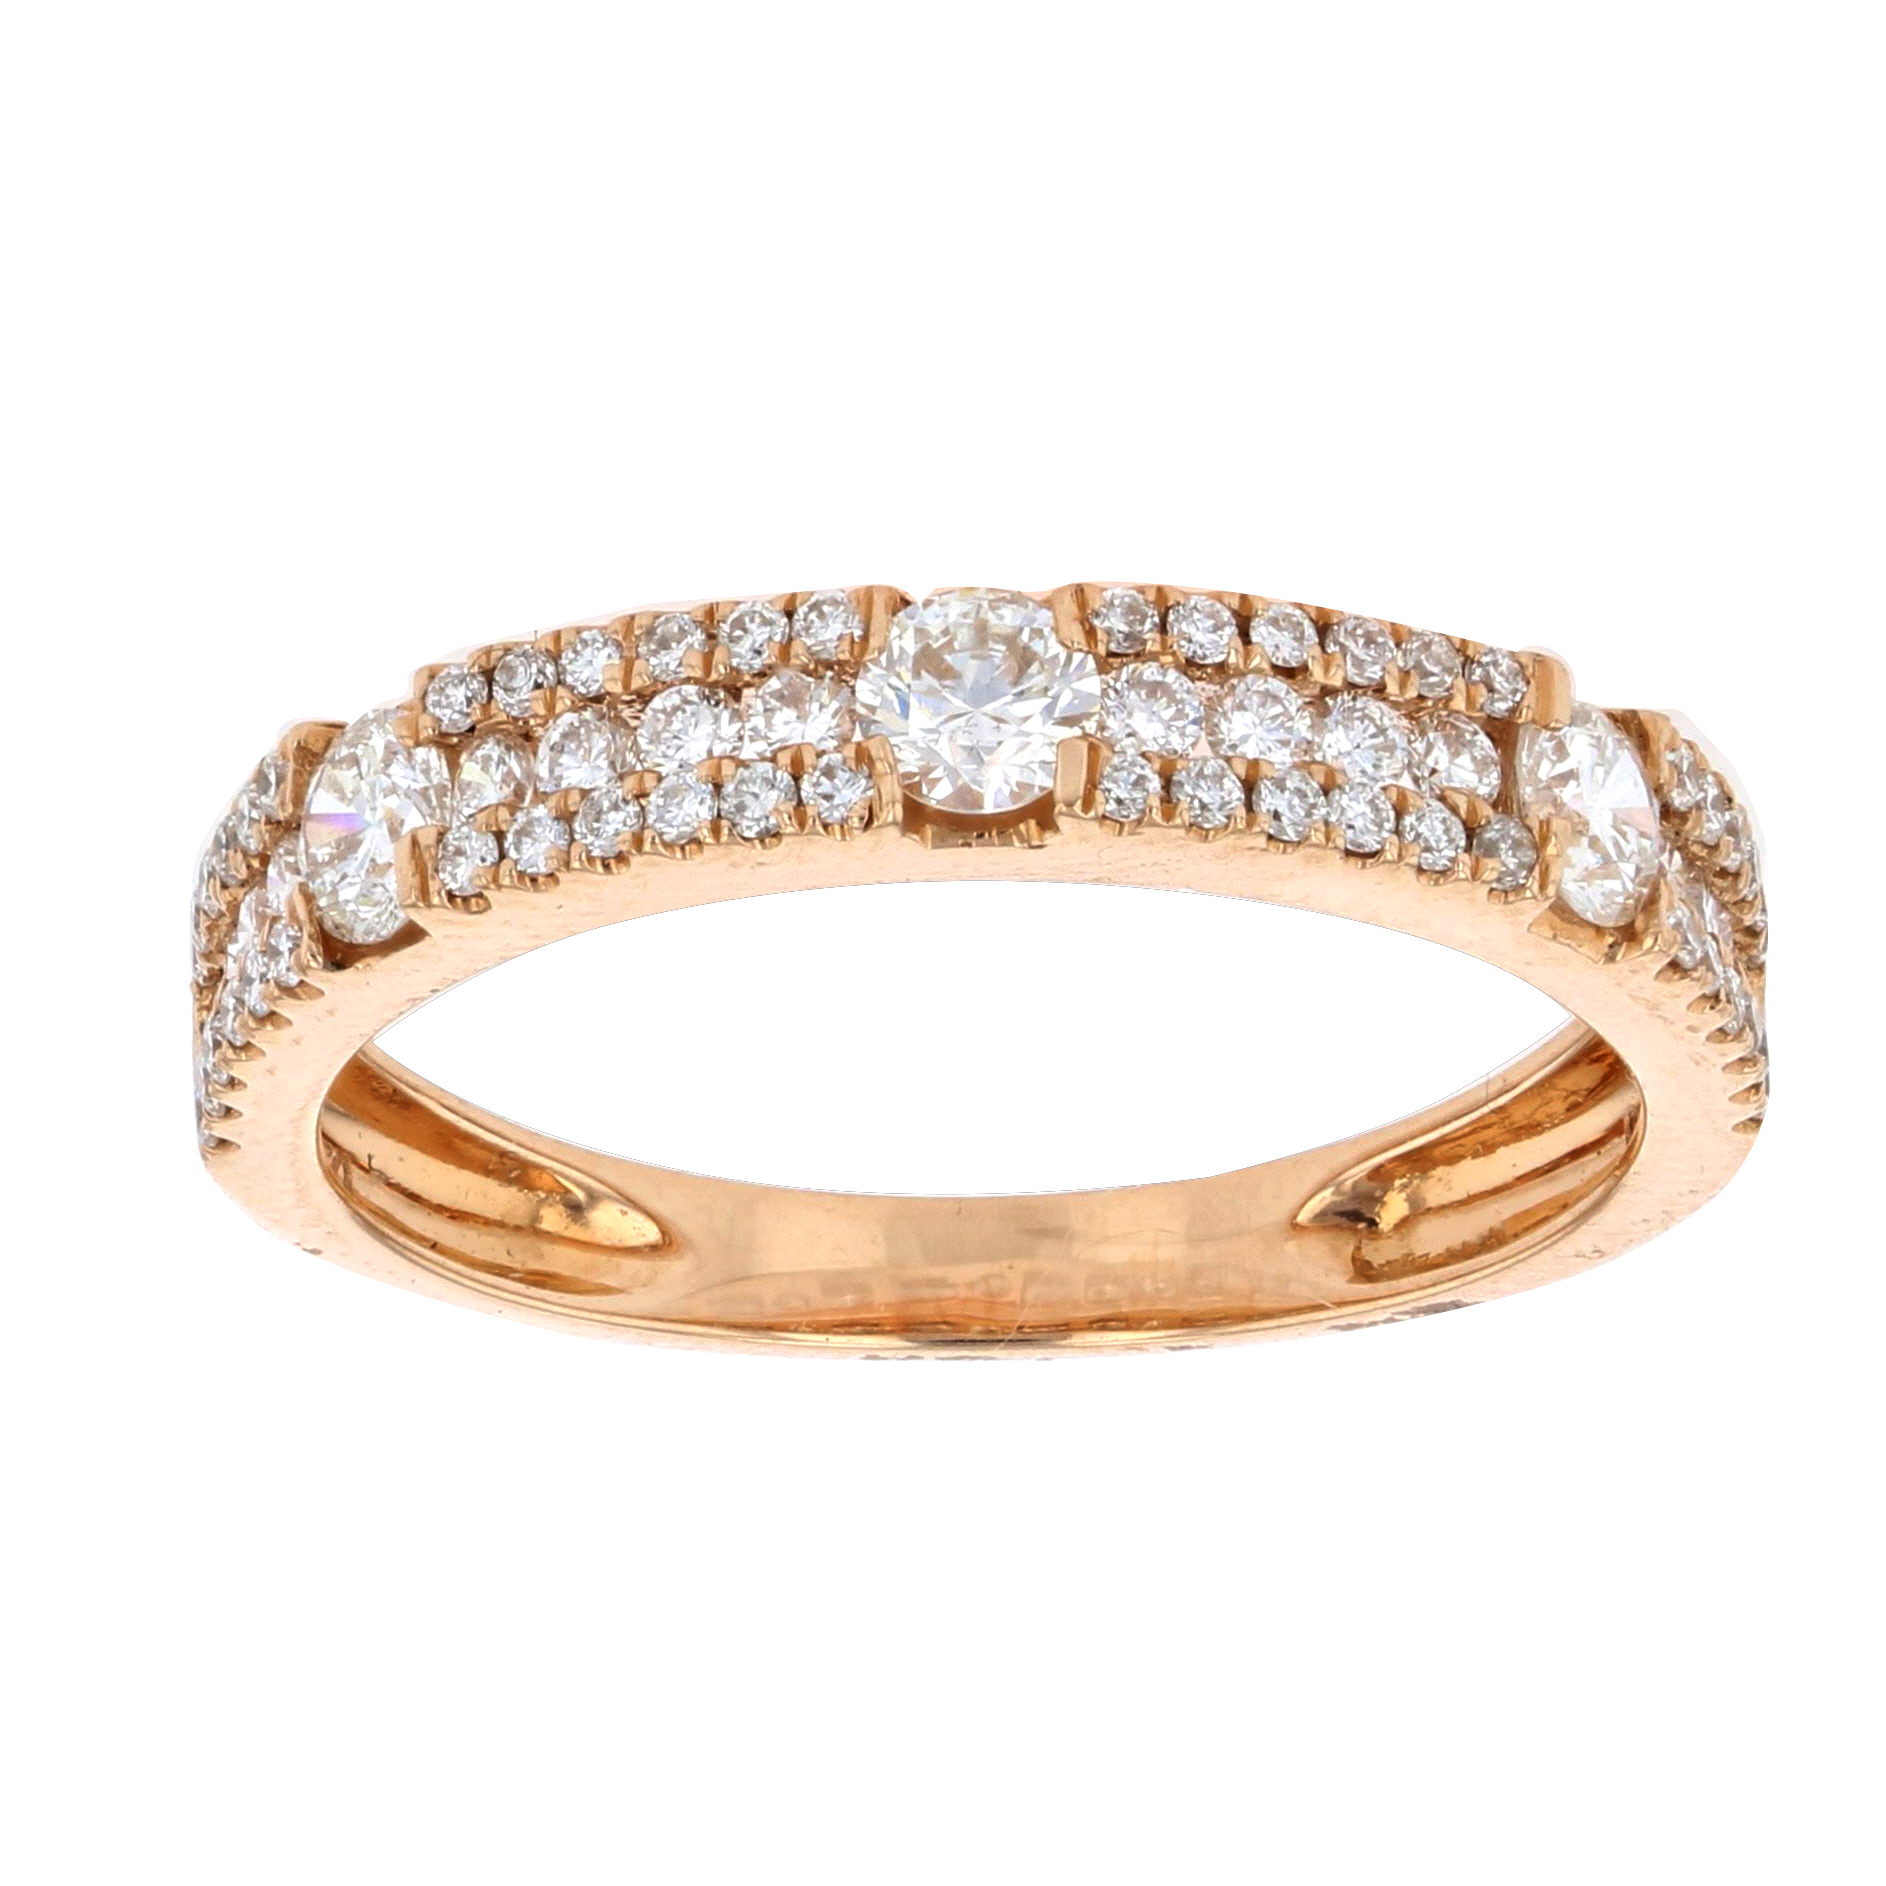 View 0.70ctw Diamond Fashion Band in 18k Rose Gold